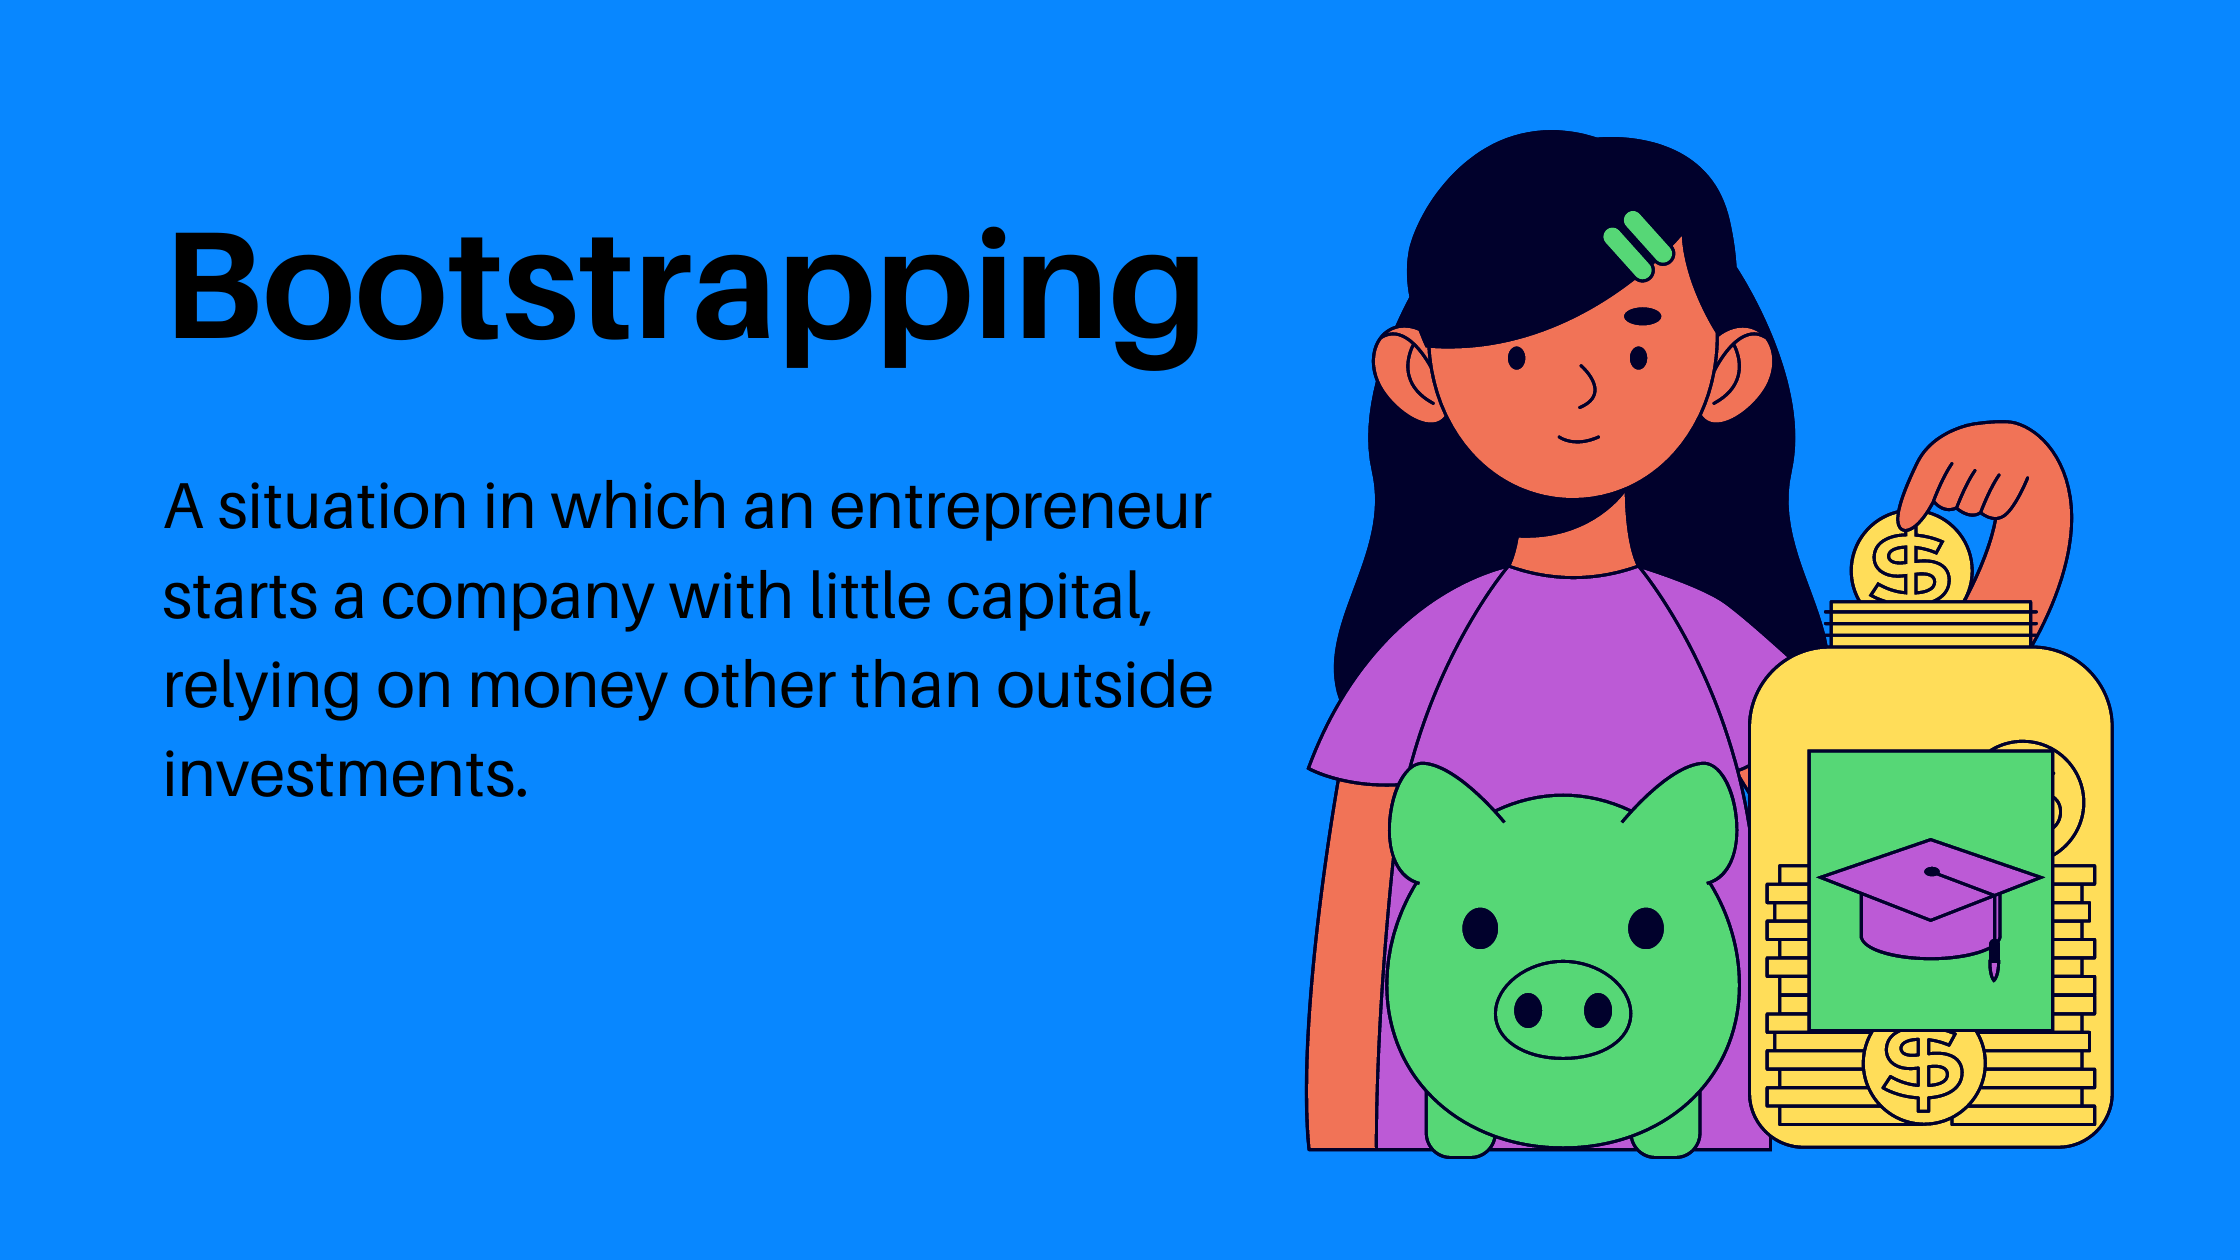 How to Bootstrap a Business While in College